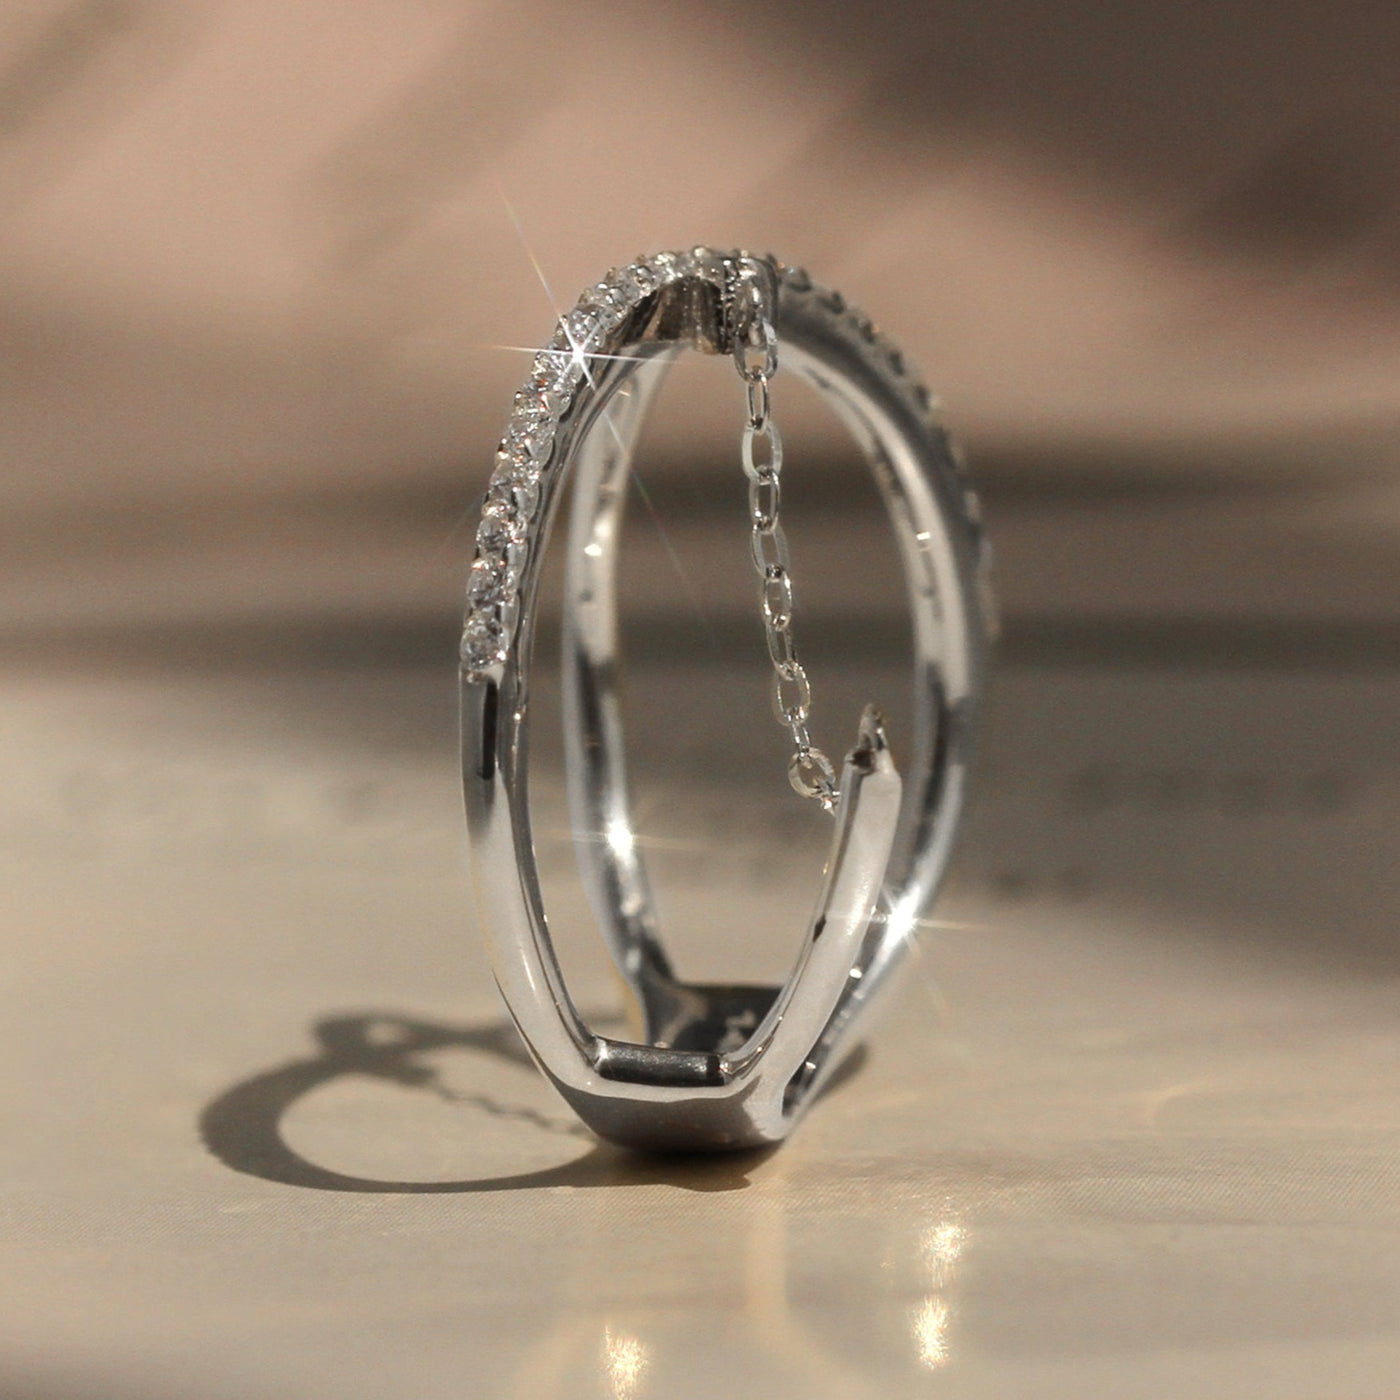 Faithful Elegance: The Ultimate X-Link Ring